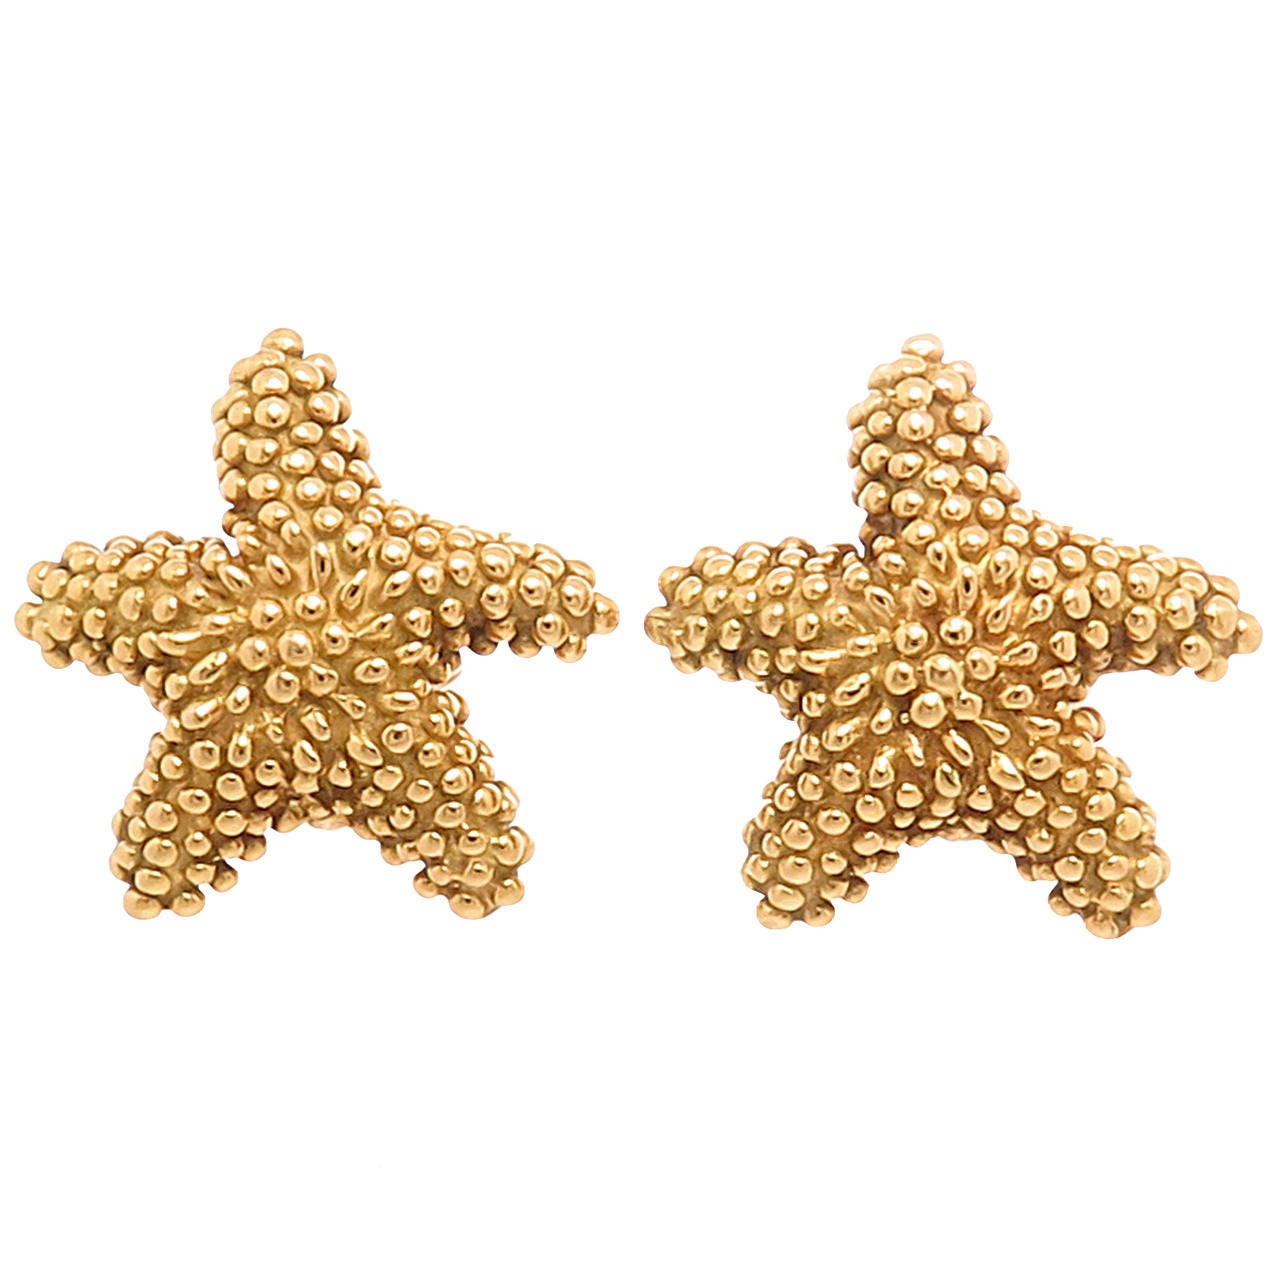 Tiffany and Co. Yellow Gold Starfish Earrings at 1stdibs